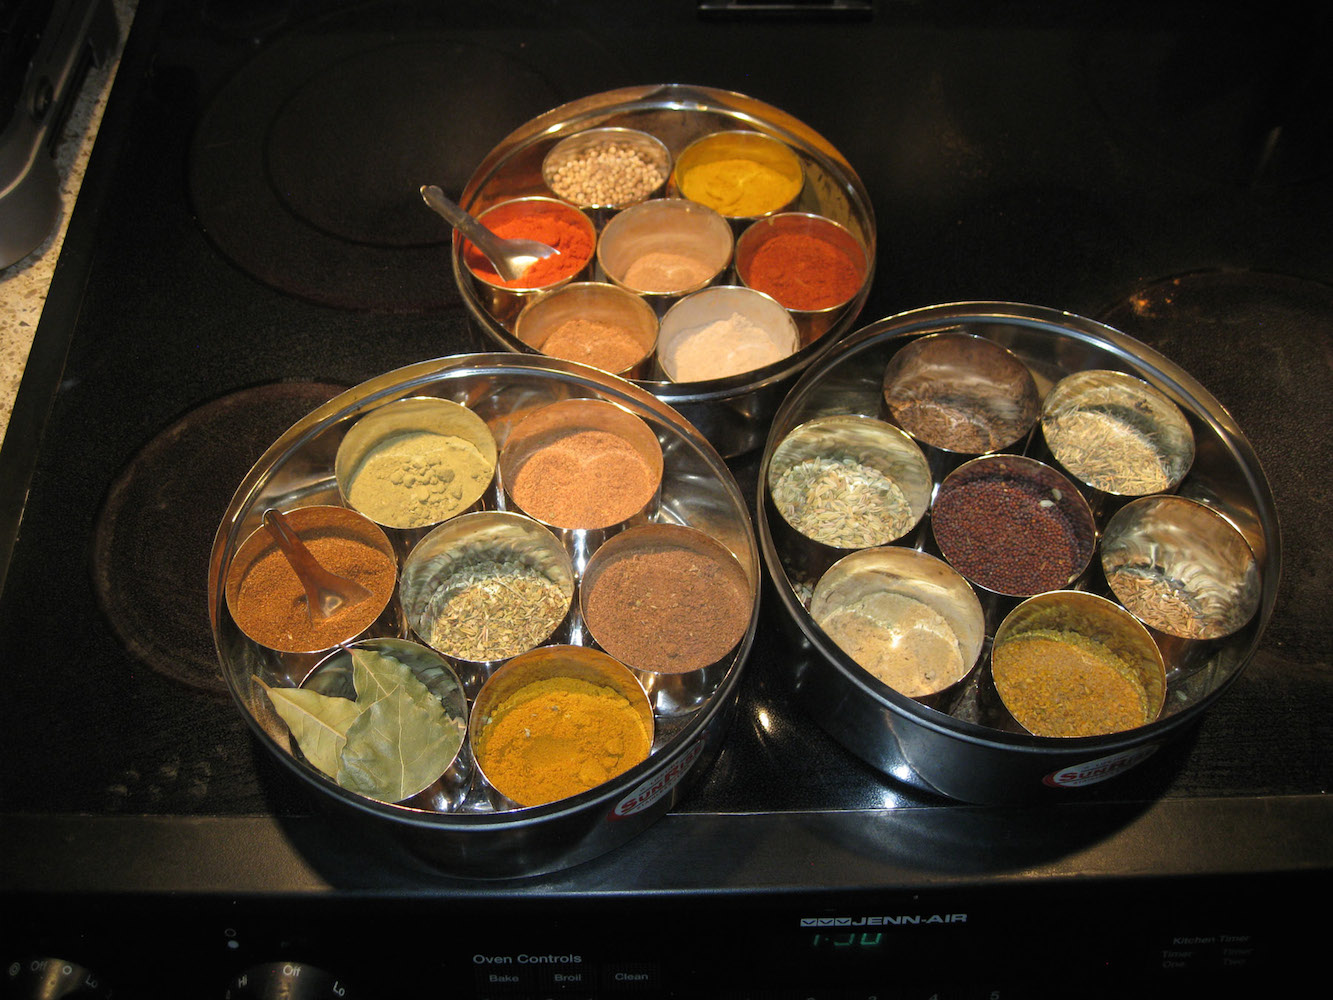 A picture of three round containers, each of which contains seven round containers filled with spices.